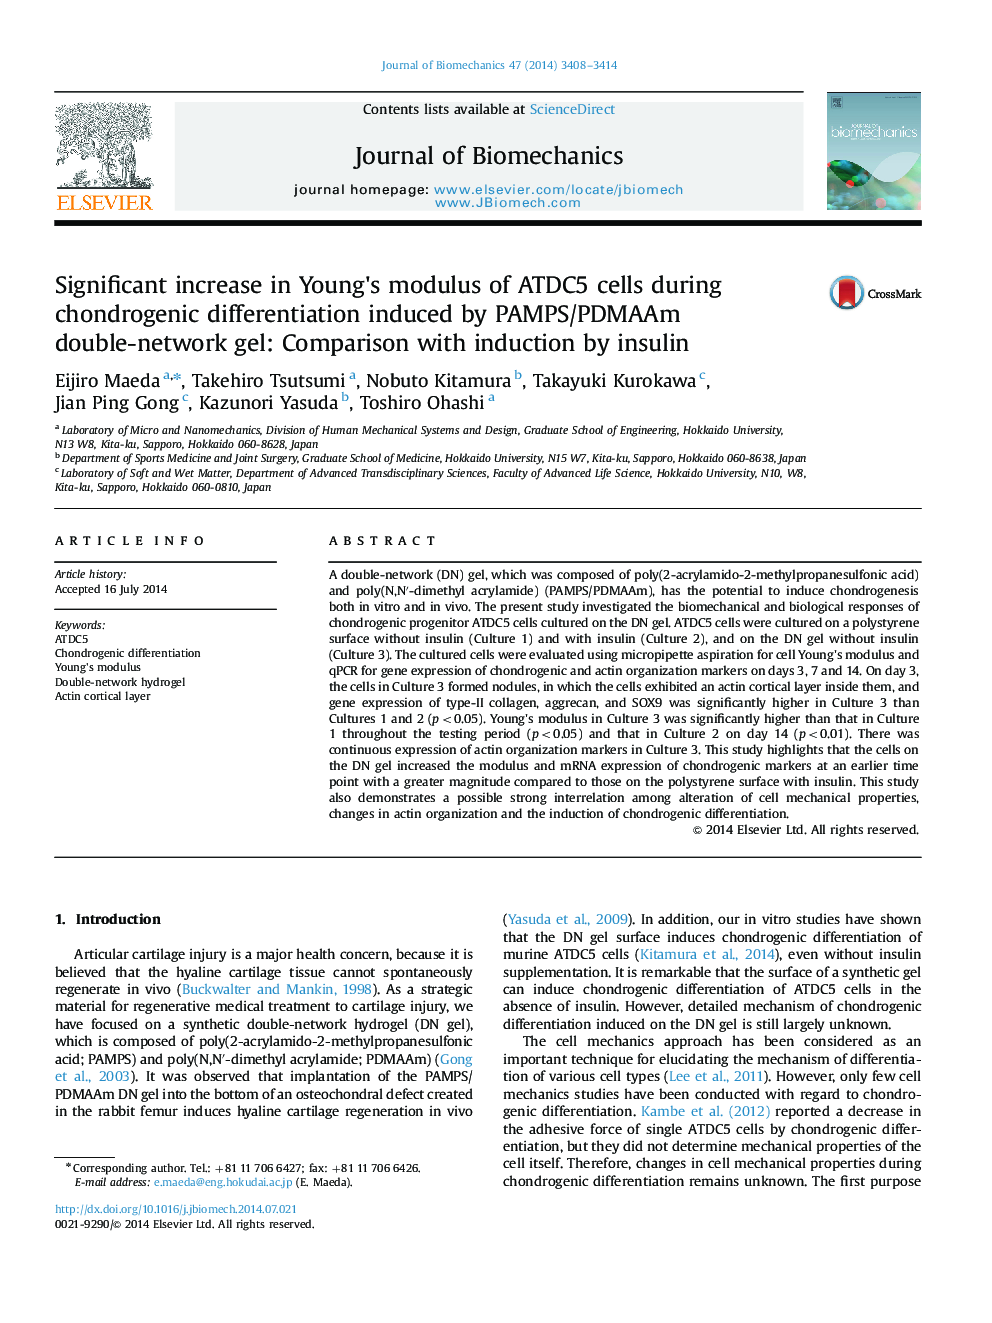 Significant increase in Young×³s modulus of ATDC5 cells during chondrogenic differentiation induced by PAMPS/PDMAAm double-network gel: Comparison with induction by insulin